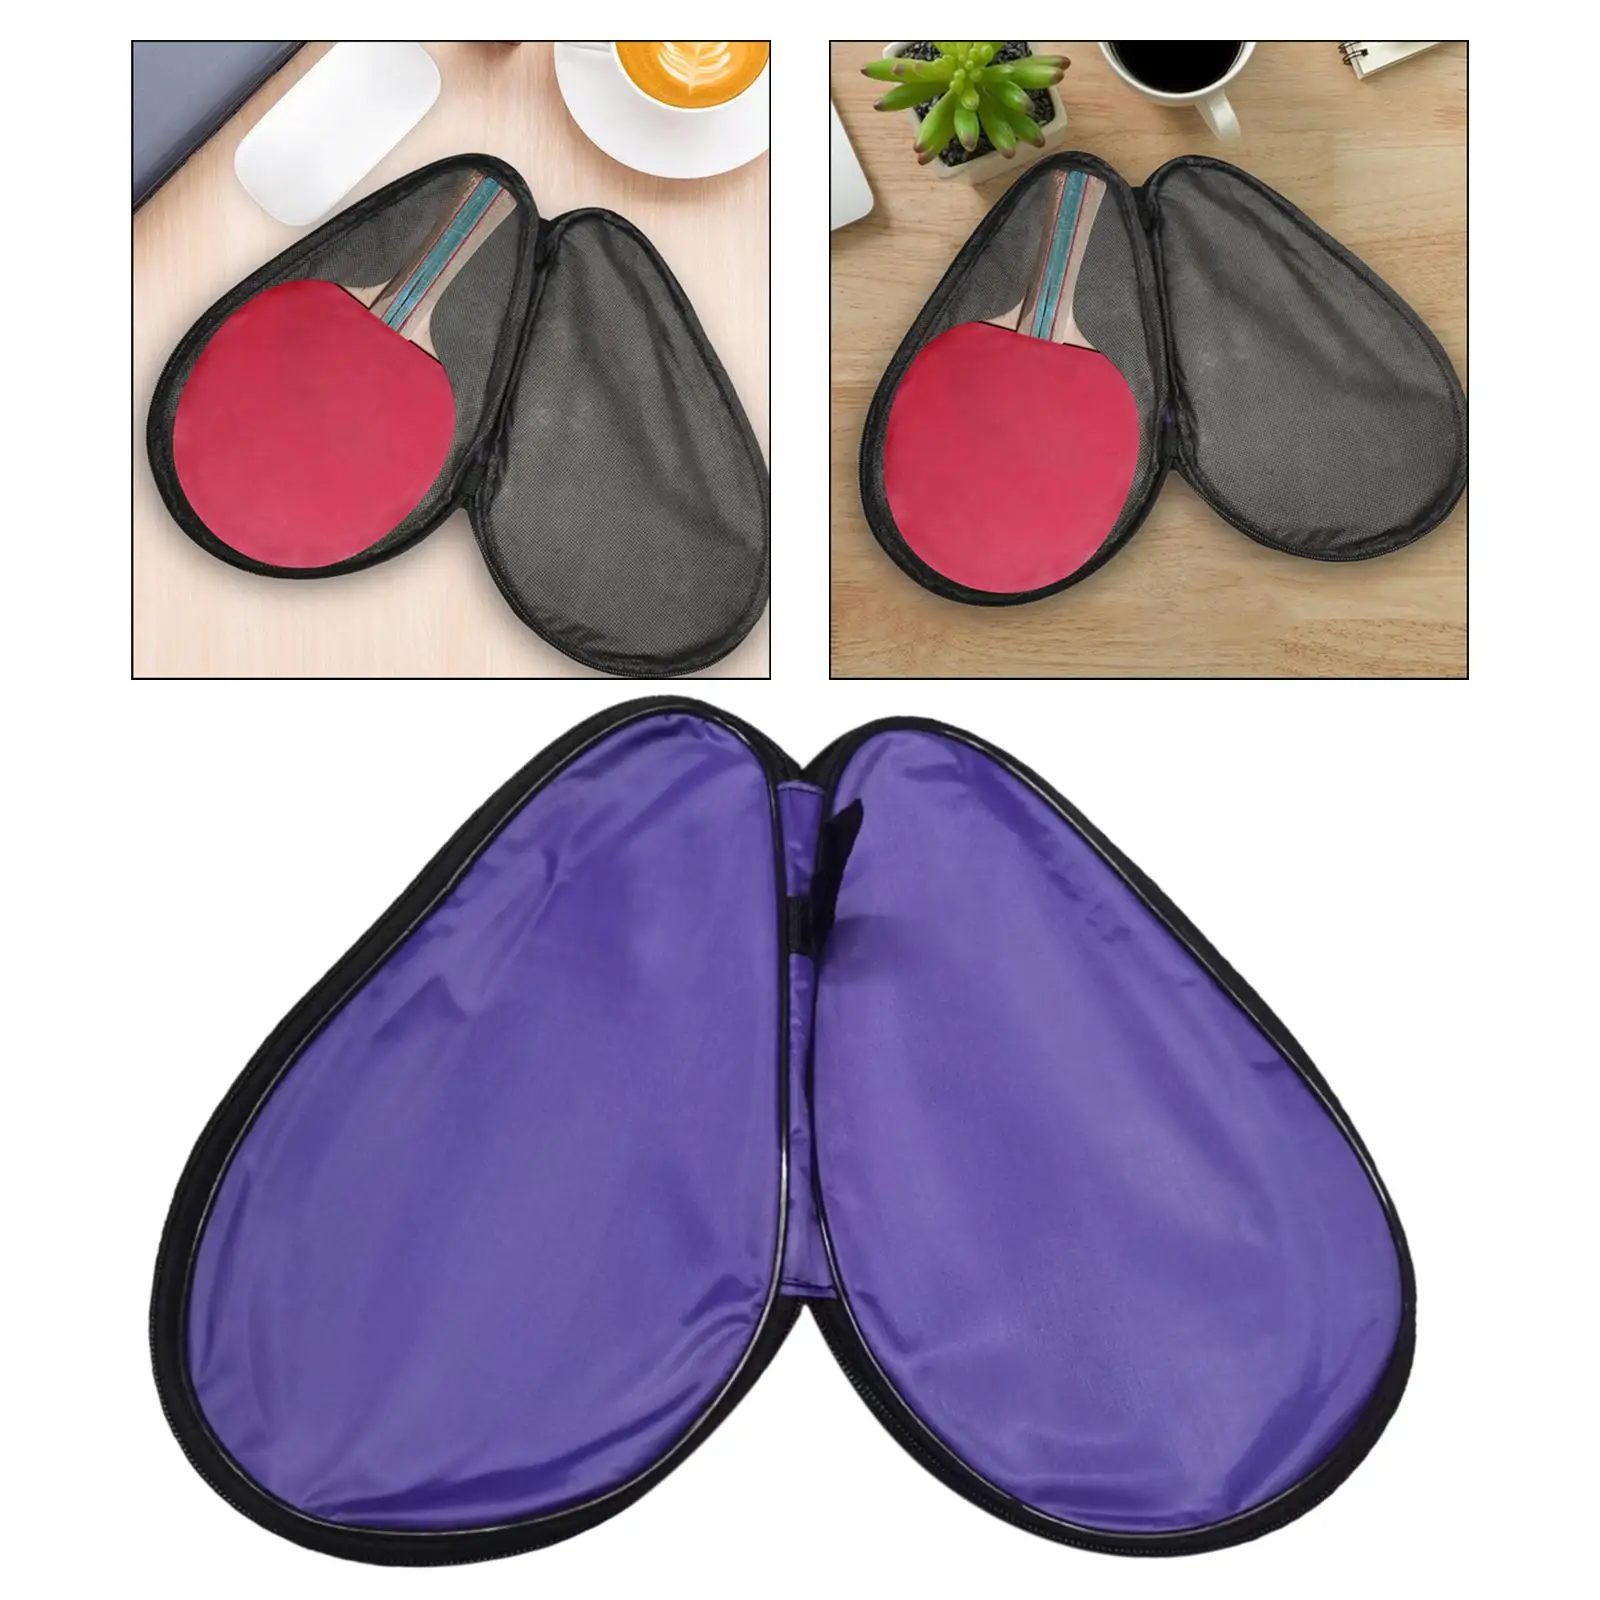 Ping Pong Case Waterproof Protective Storage Table Tennis Racket Cover Table Tennis Bag for Gym Competition Adult Training